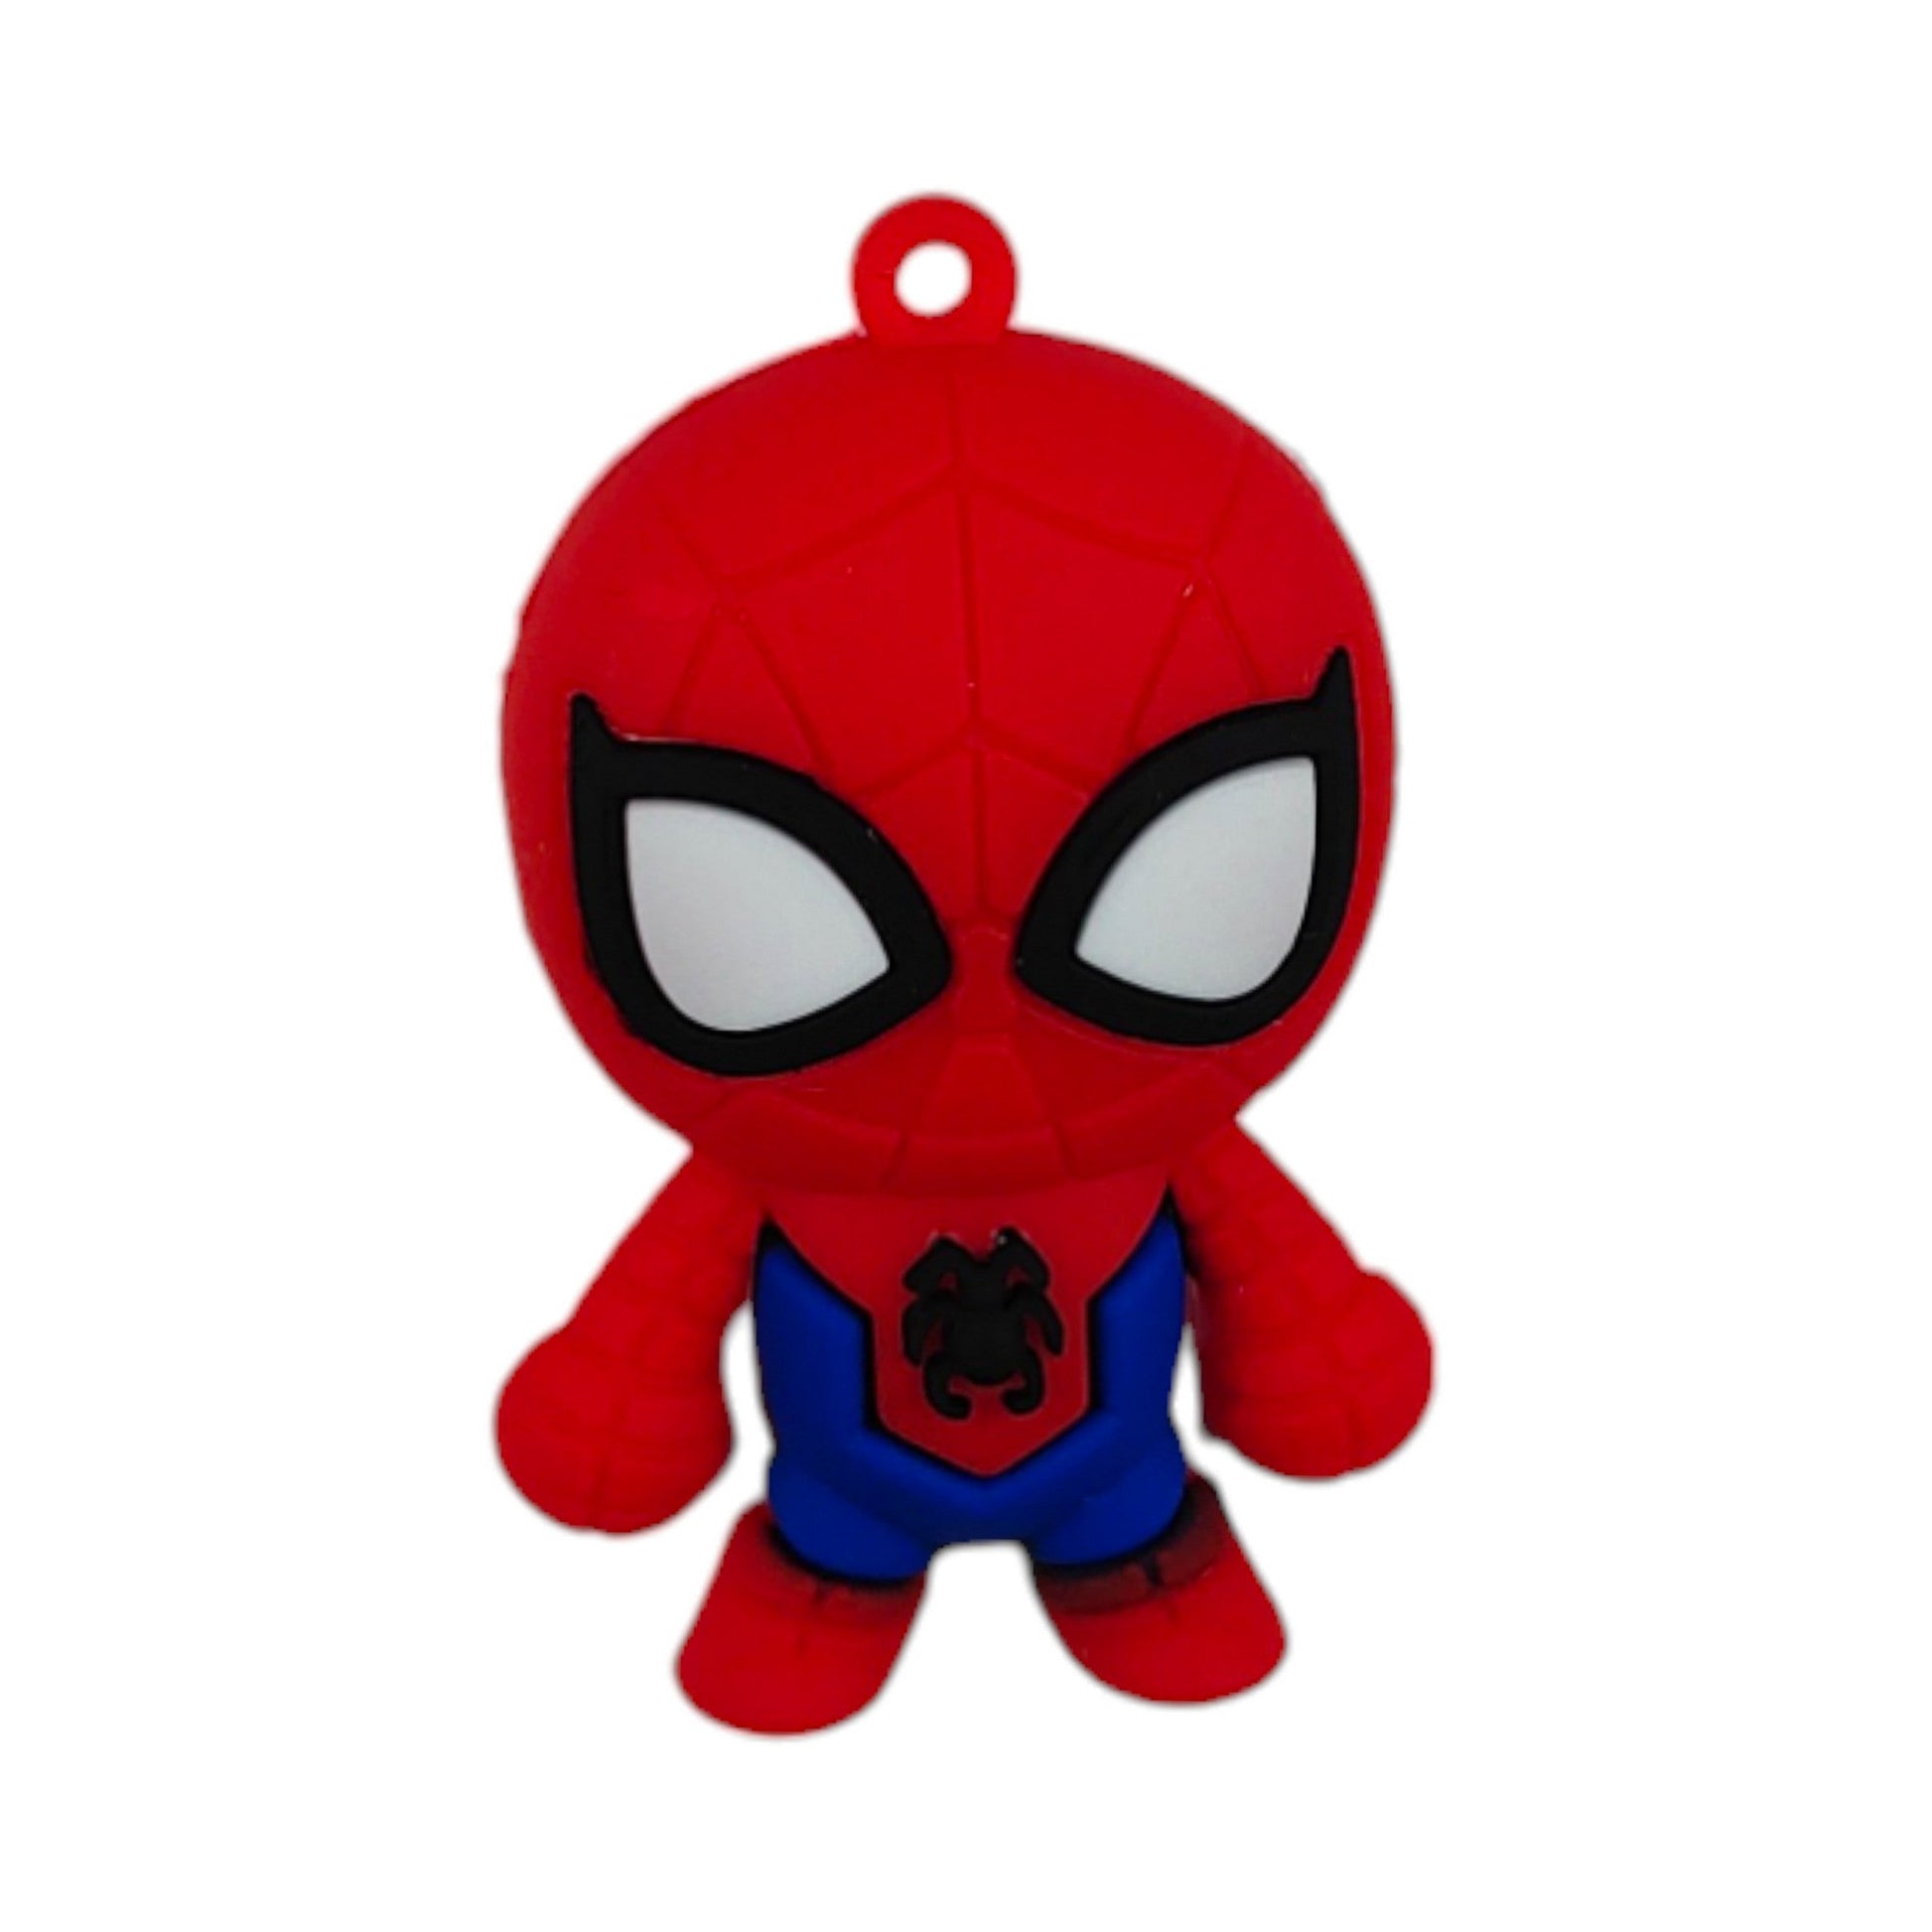 SpiderMan Doll Resin Motif For Craft Design Or Decoration, 25 Pcs,Red-13526